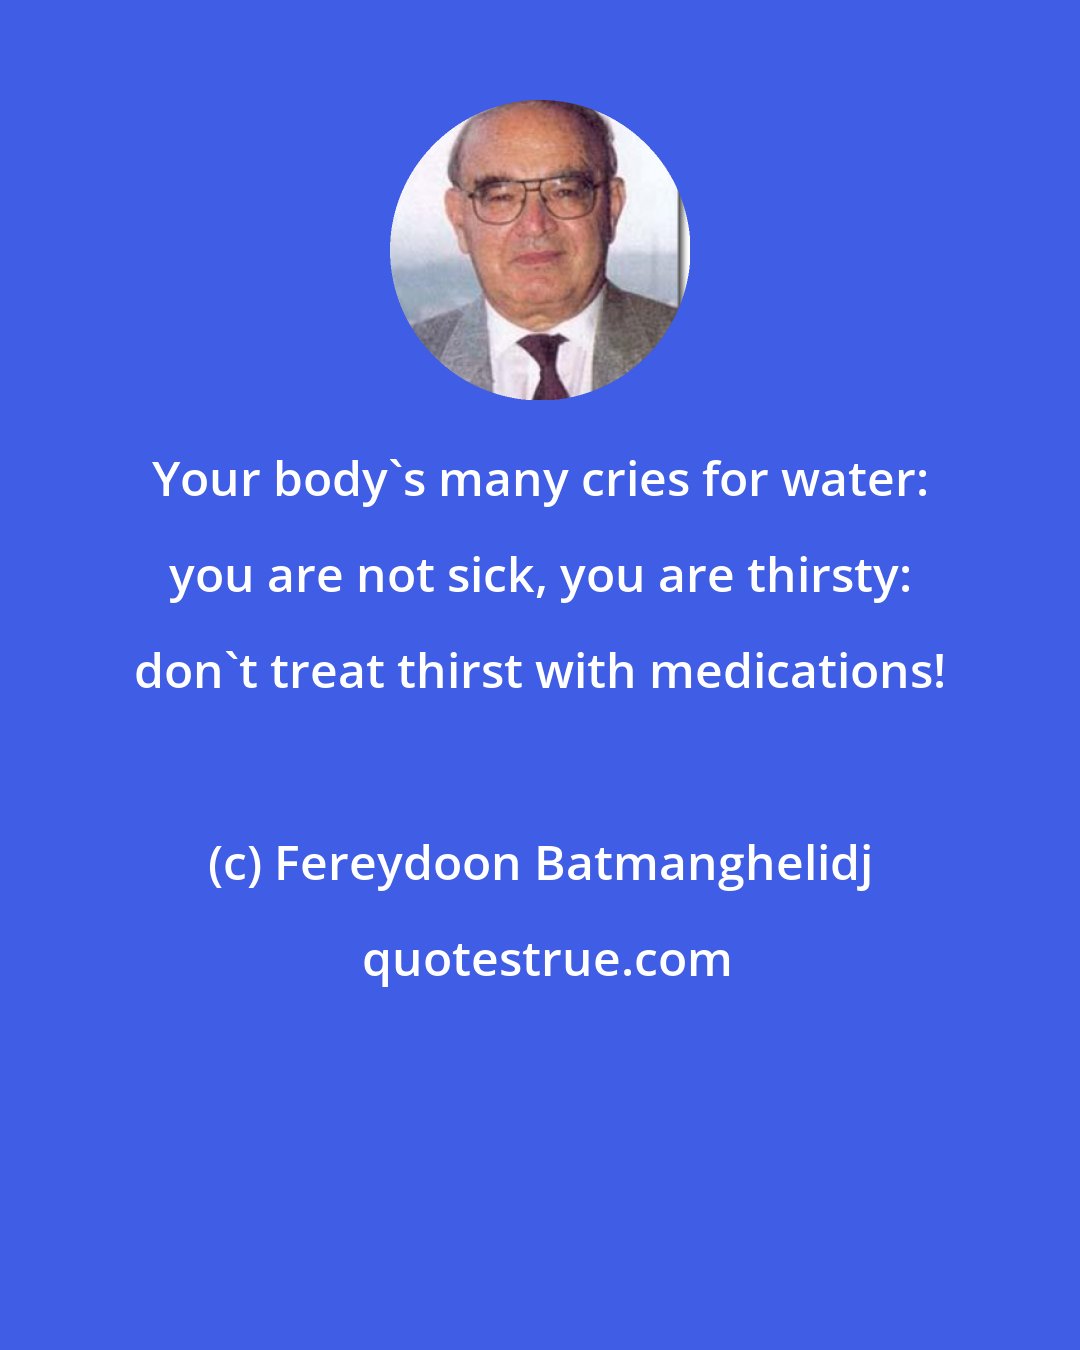 Fereydoon Batmanghelidj: Your body's many cries for water: you are not sick, you are thirsty: don't treat thirst with medications!